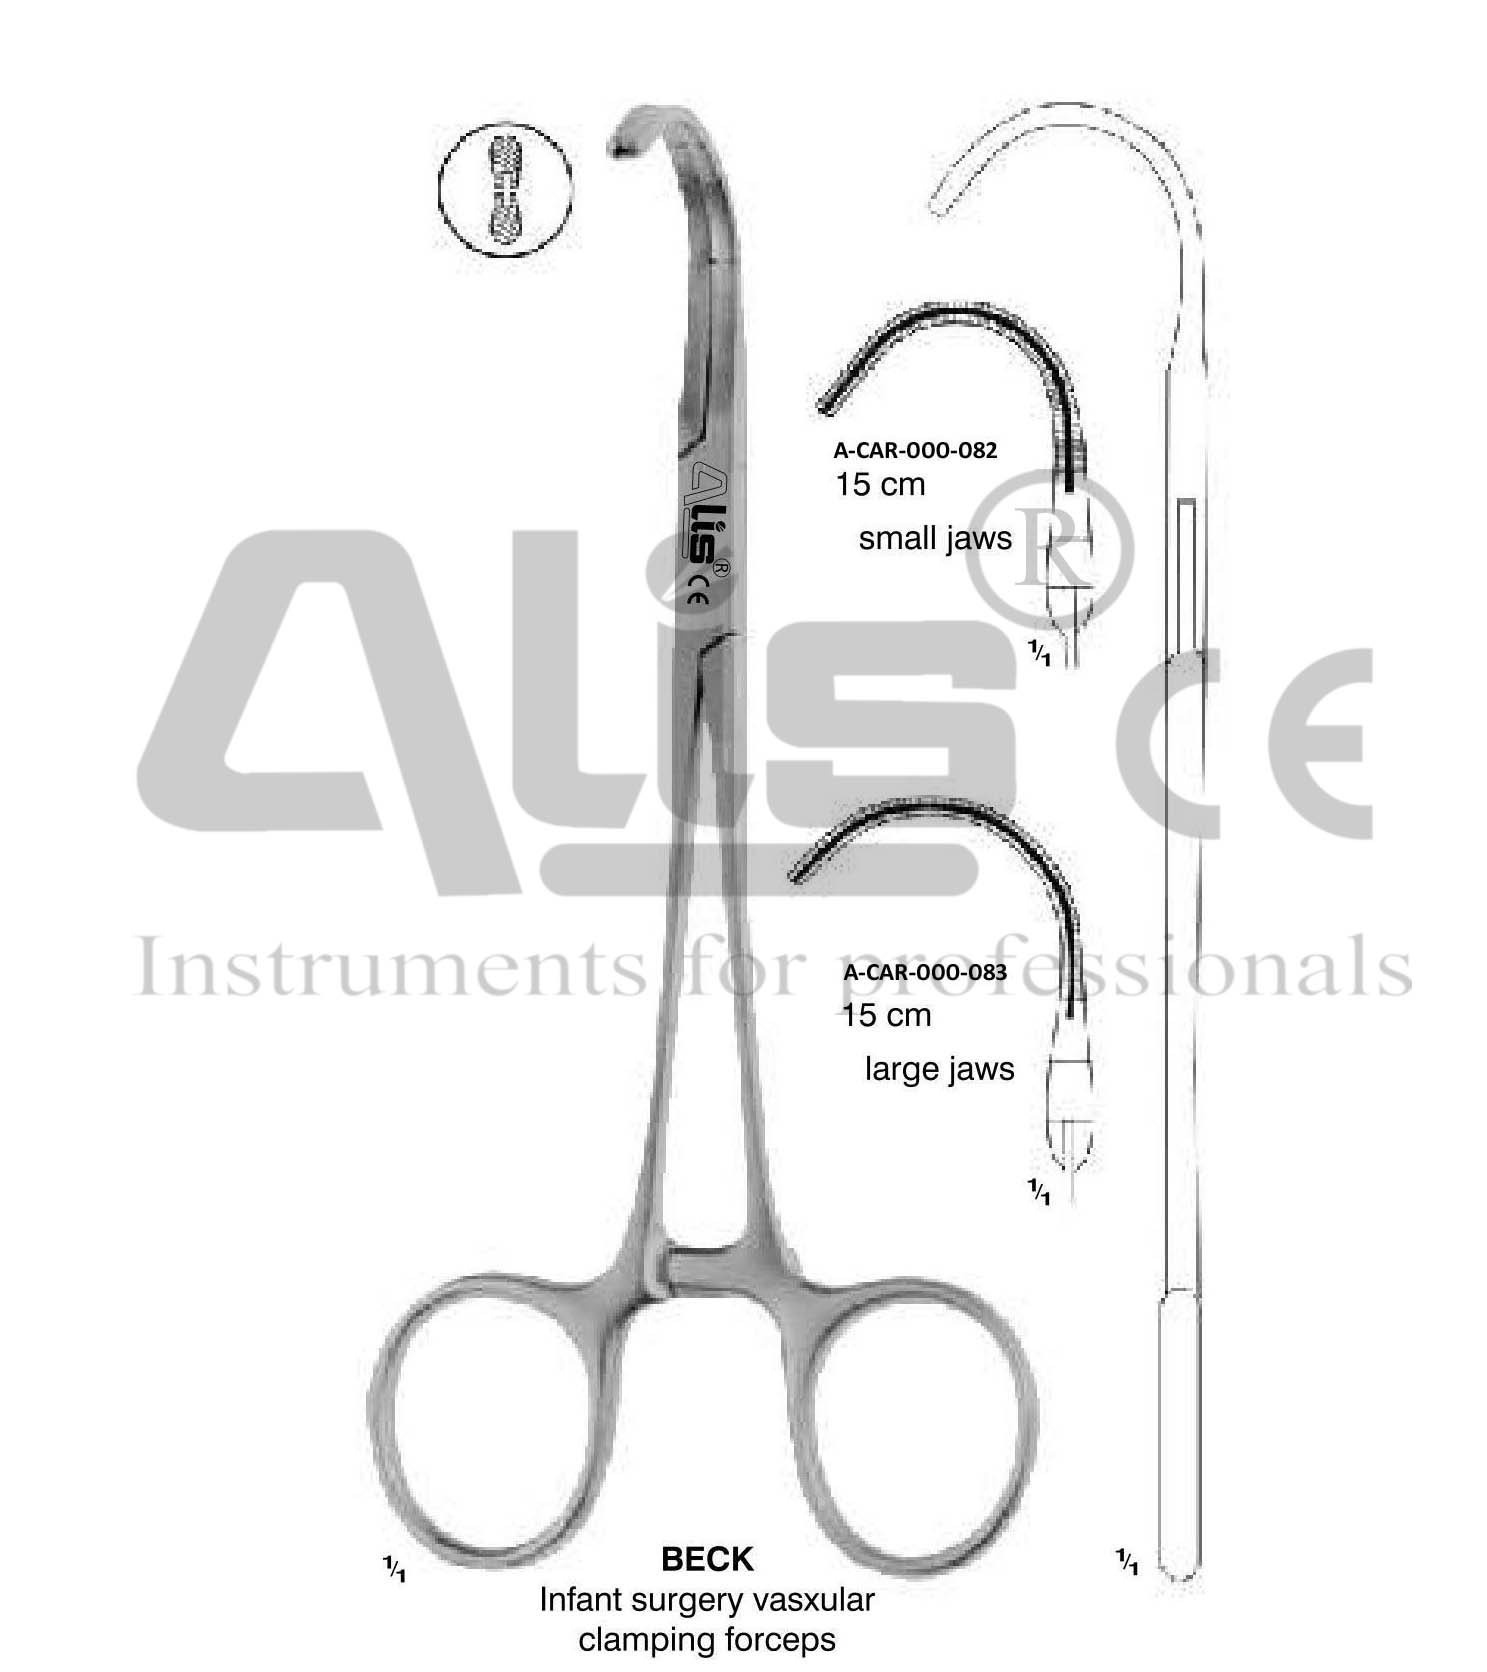 BECK INFANT SURGERY VASCULAR CLAMPING FORCEPS